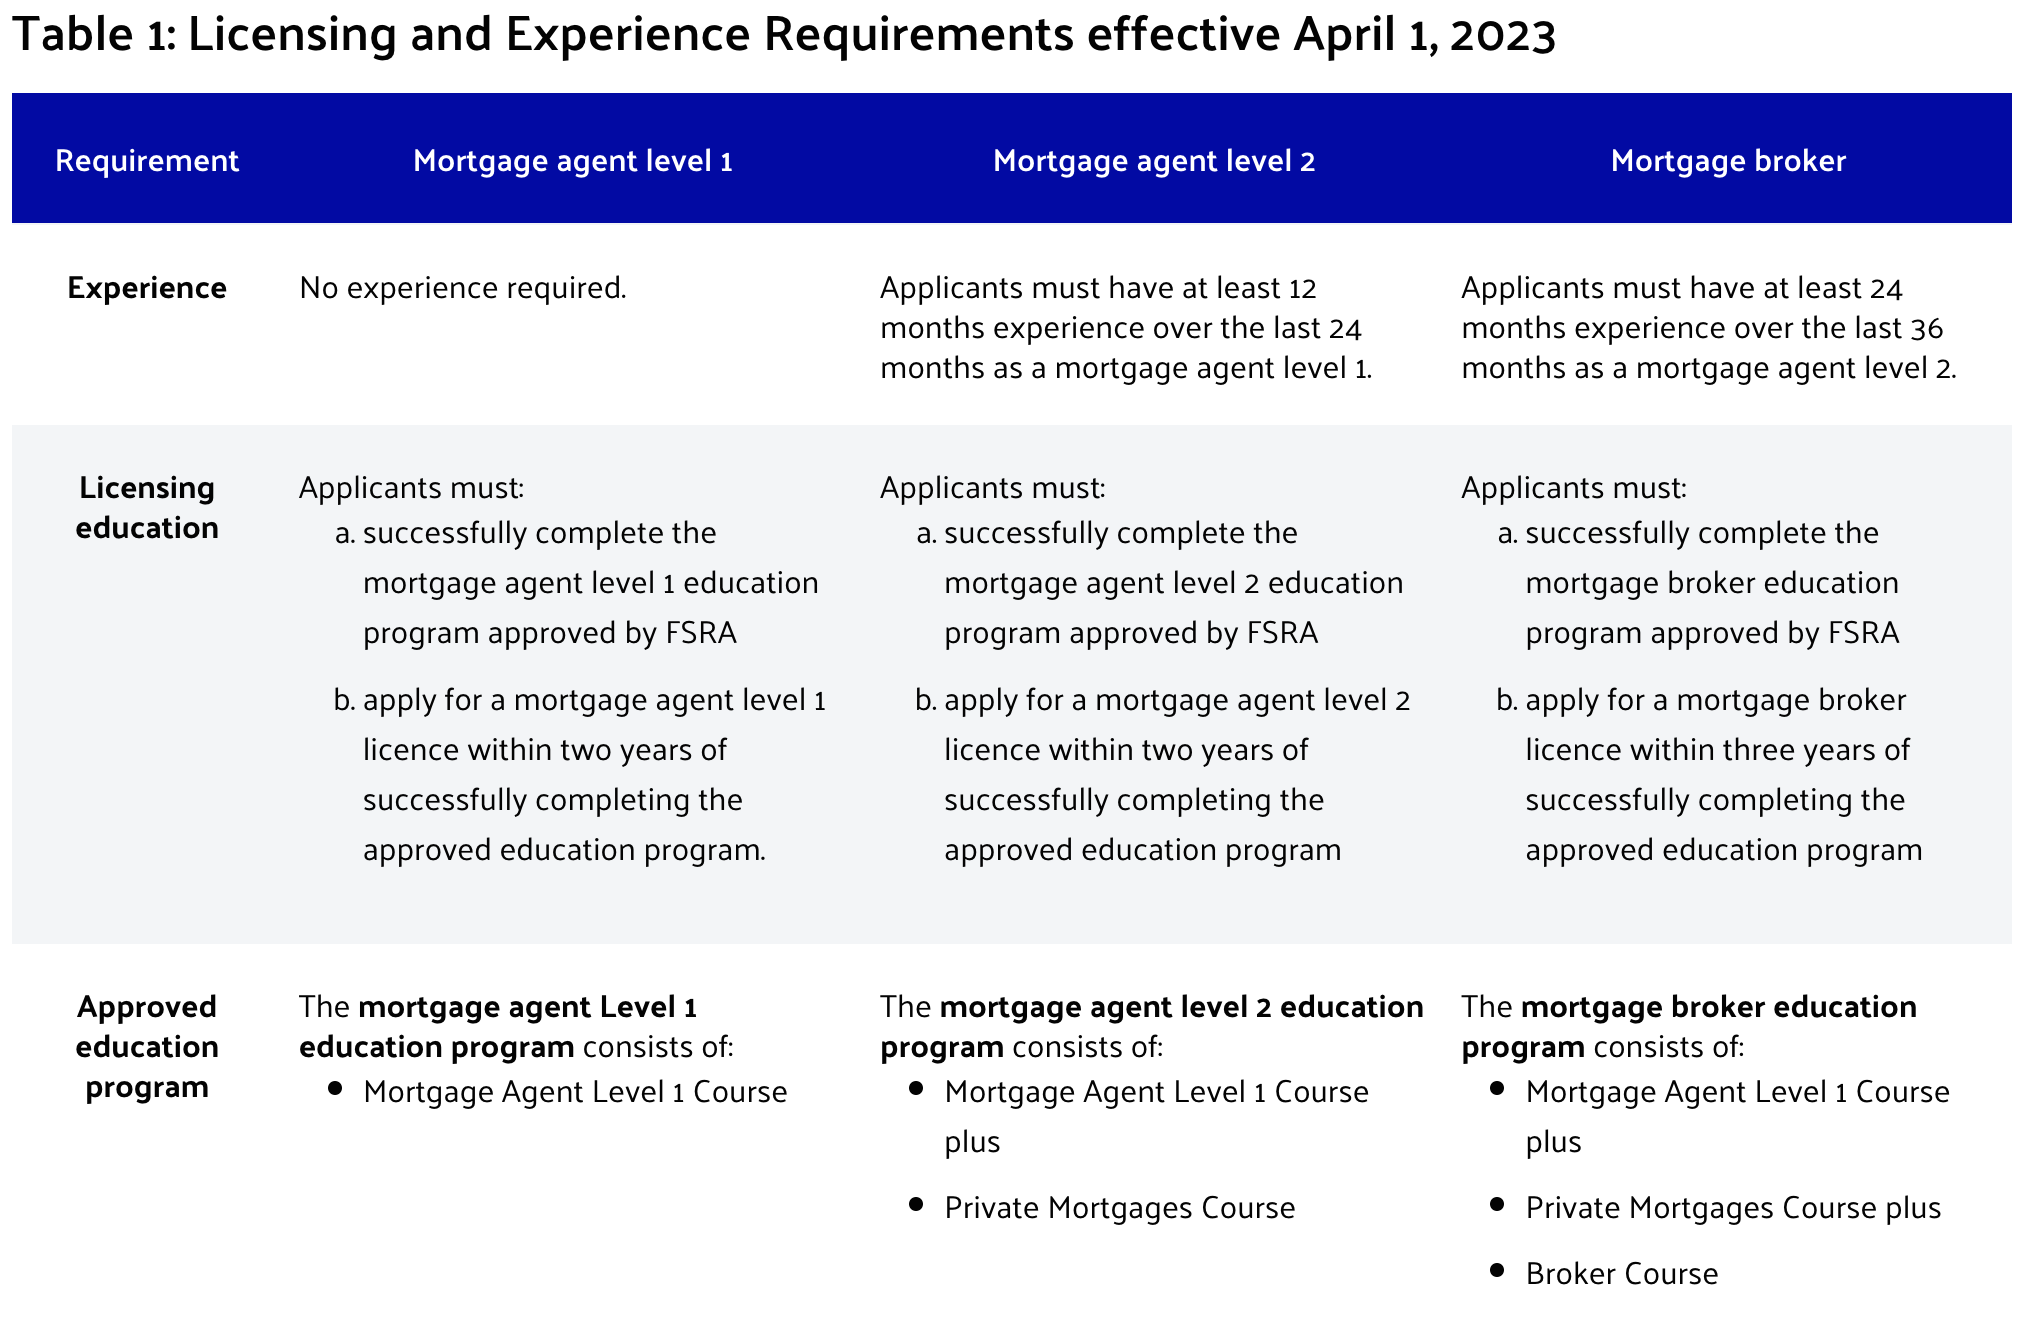 FSRA licensing table that explains the different licensing and experience requirements for different mortgage agent levels and mortgage brokers.